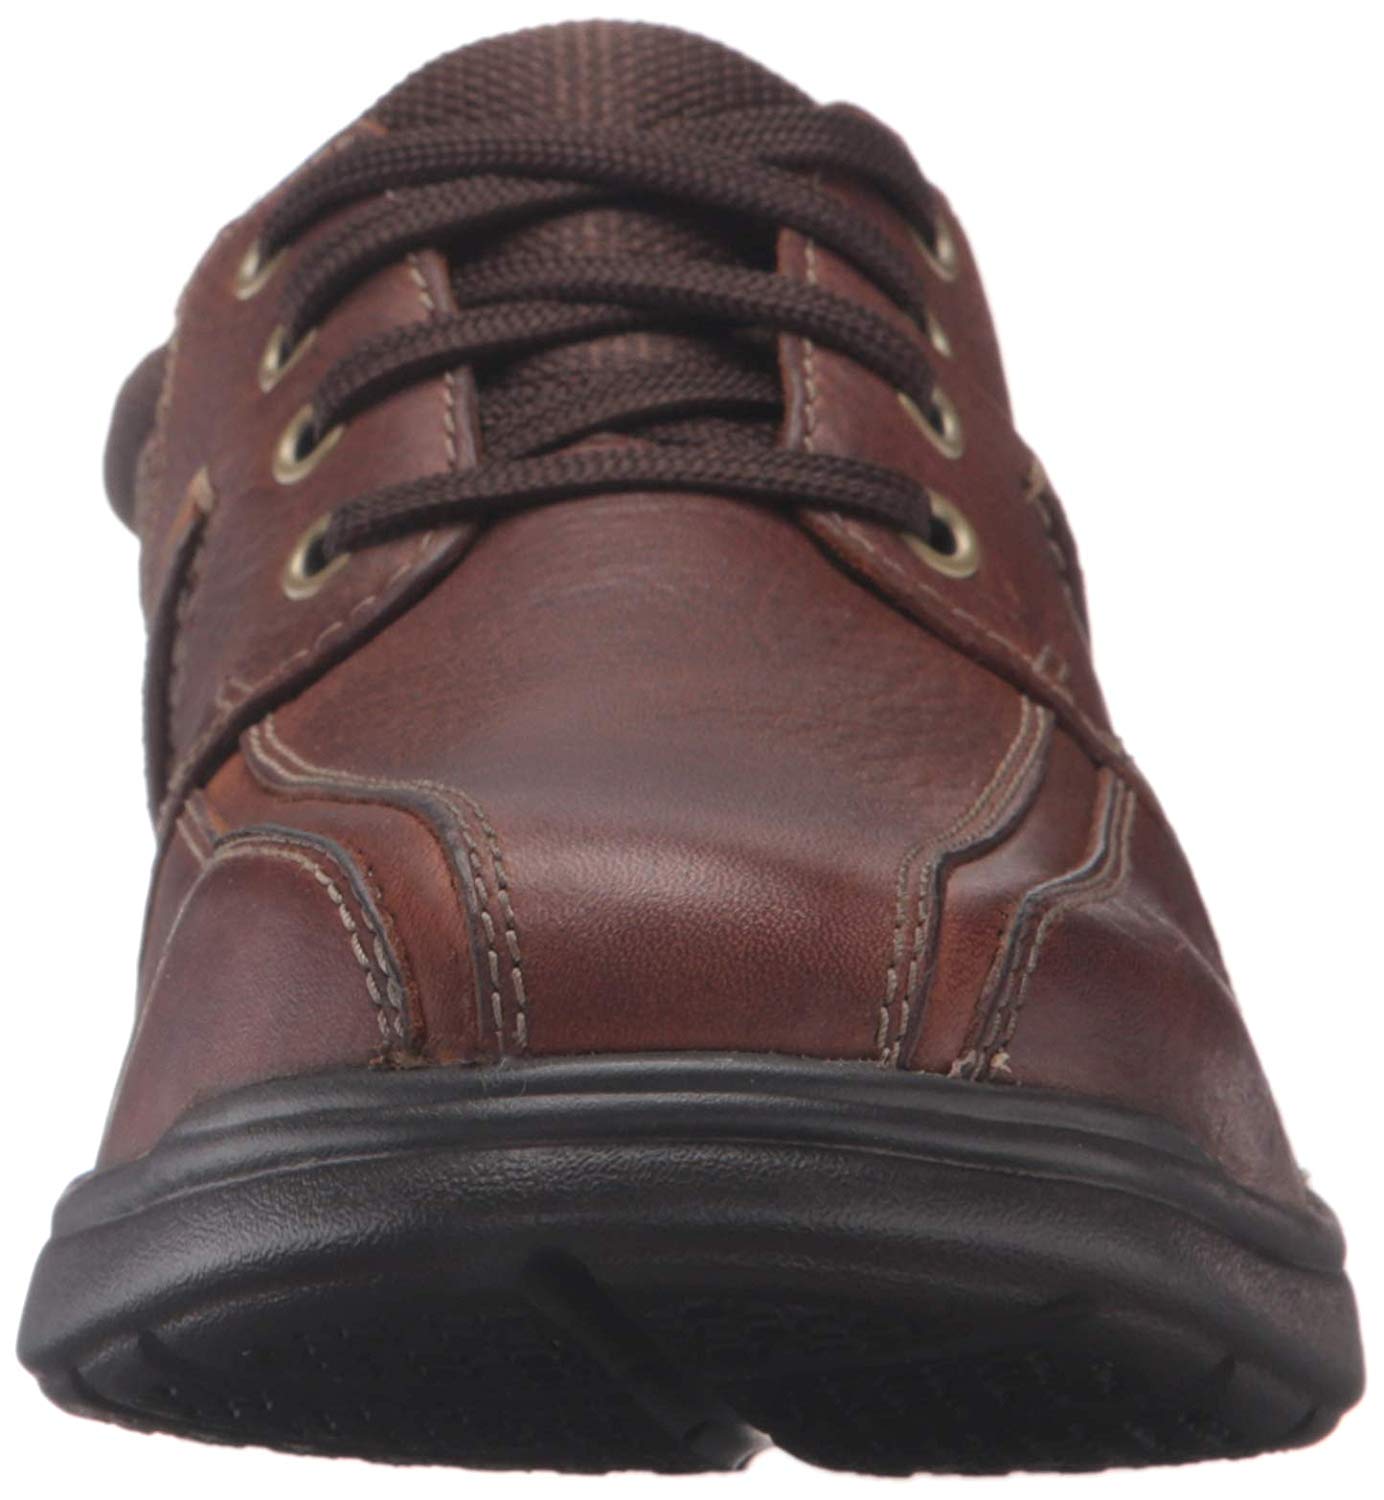 Clarks Men's Shoes Cotrell Walk Leather Lace Up Casual, Tobacco, Size 7 ...